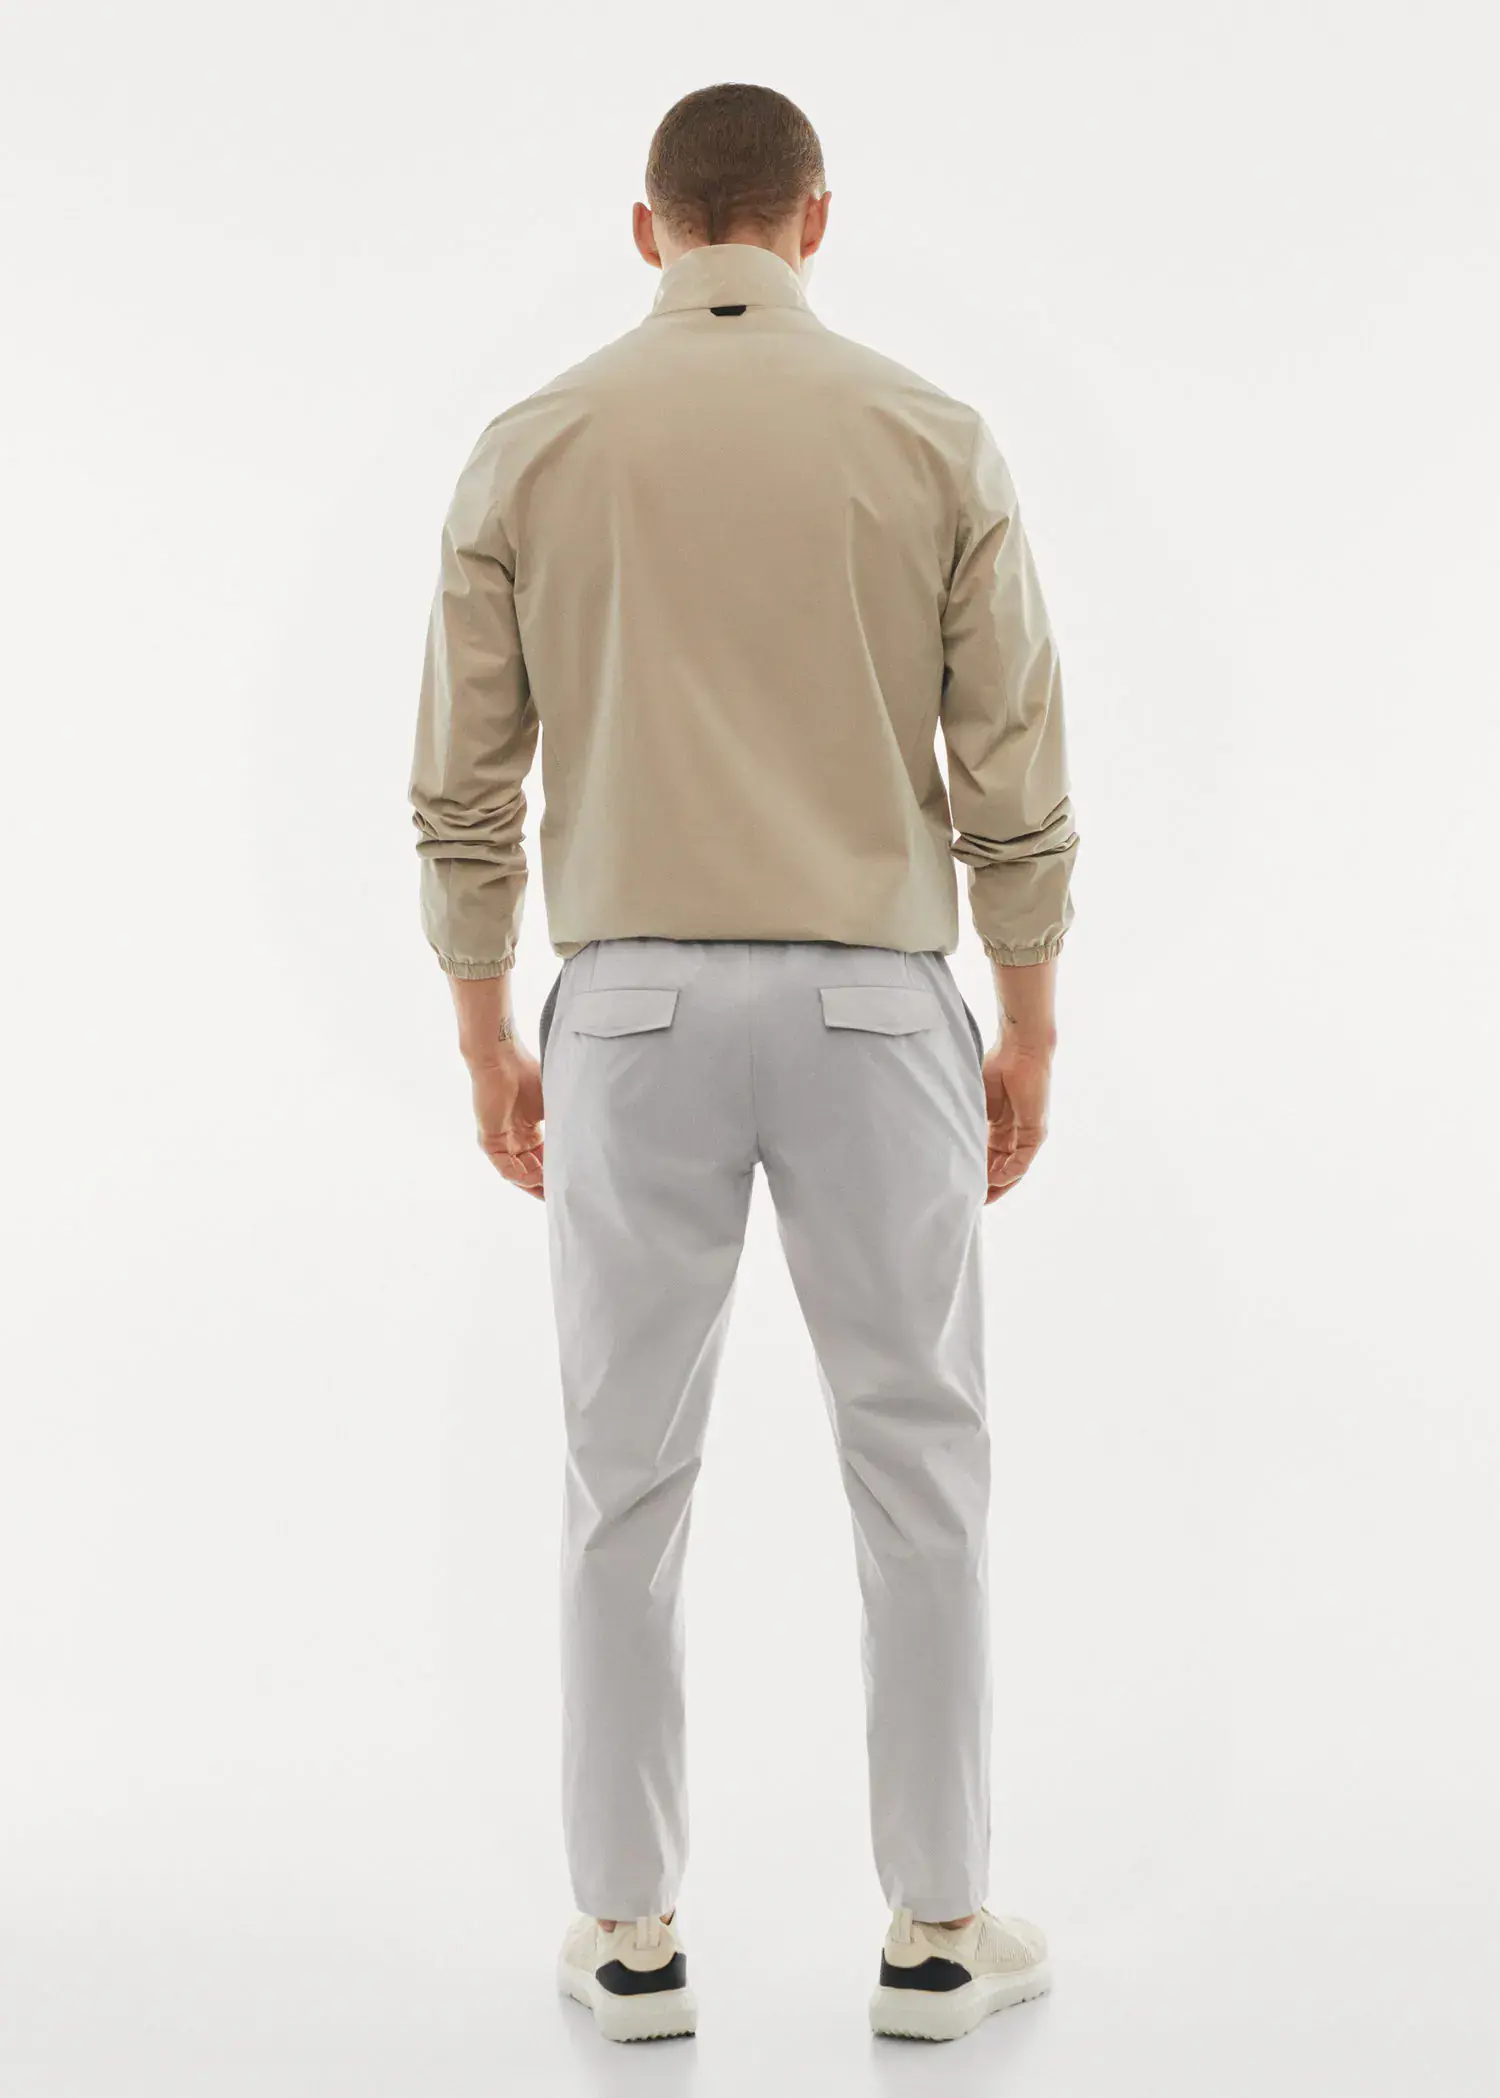 Mango Water-repellent technical trousers. a man in a tan jacket and white pants. 